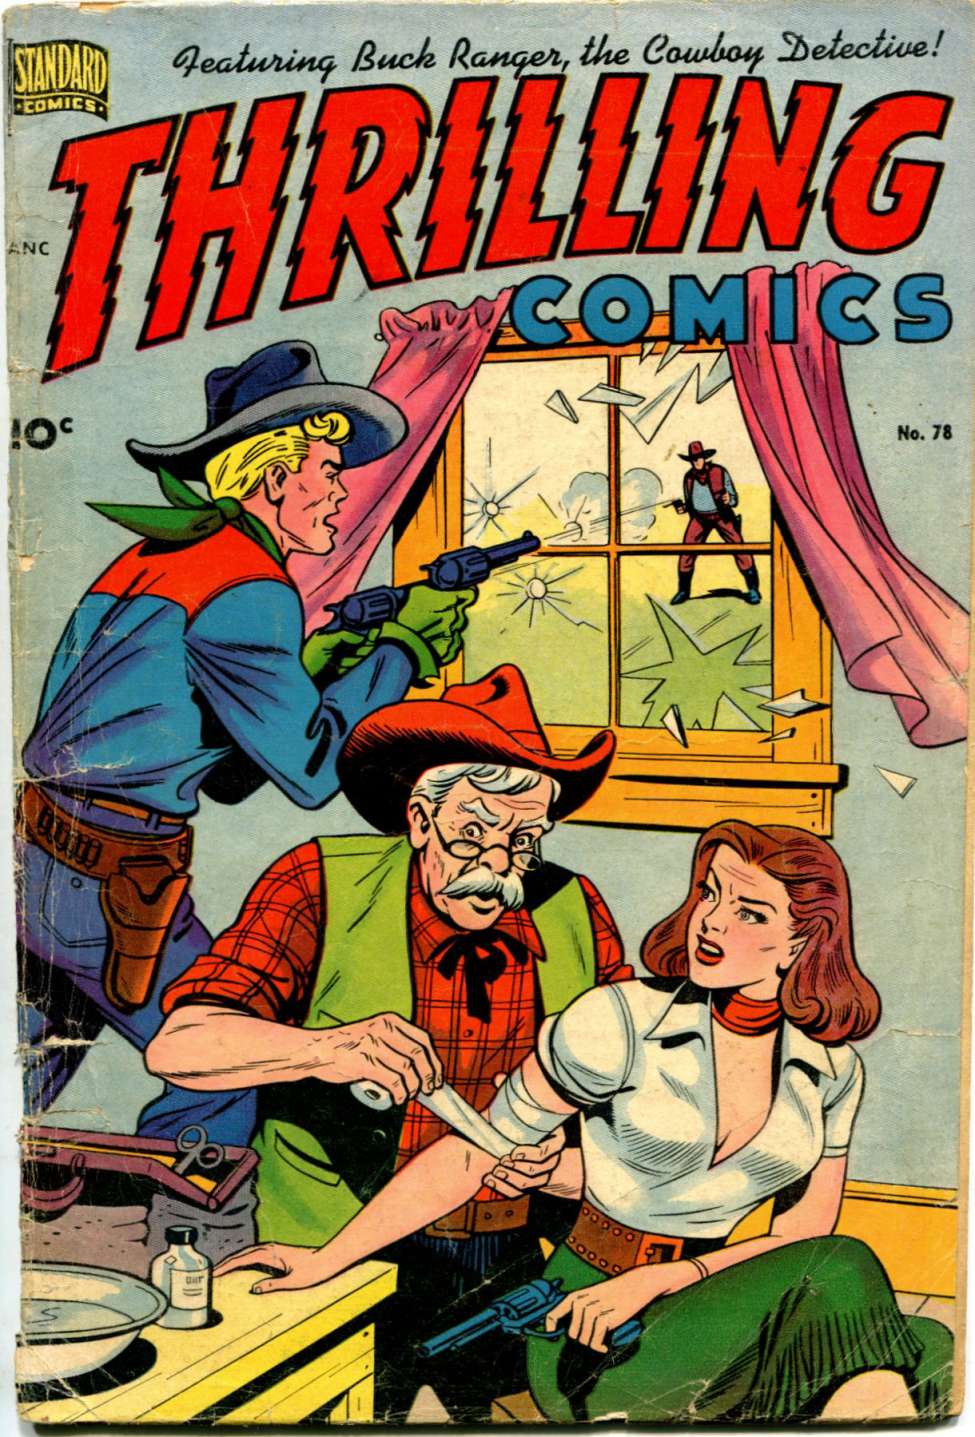 Book Cover For Thrilling Comics 78 - Version 1